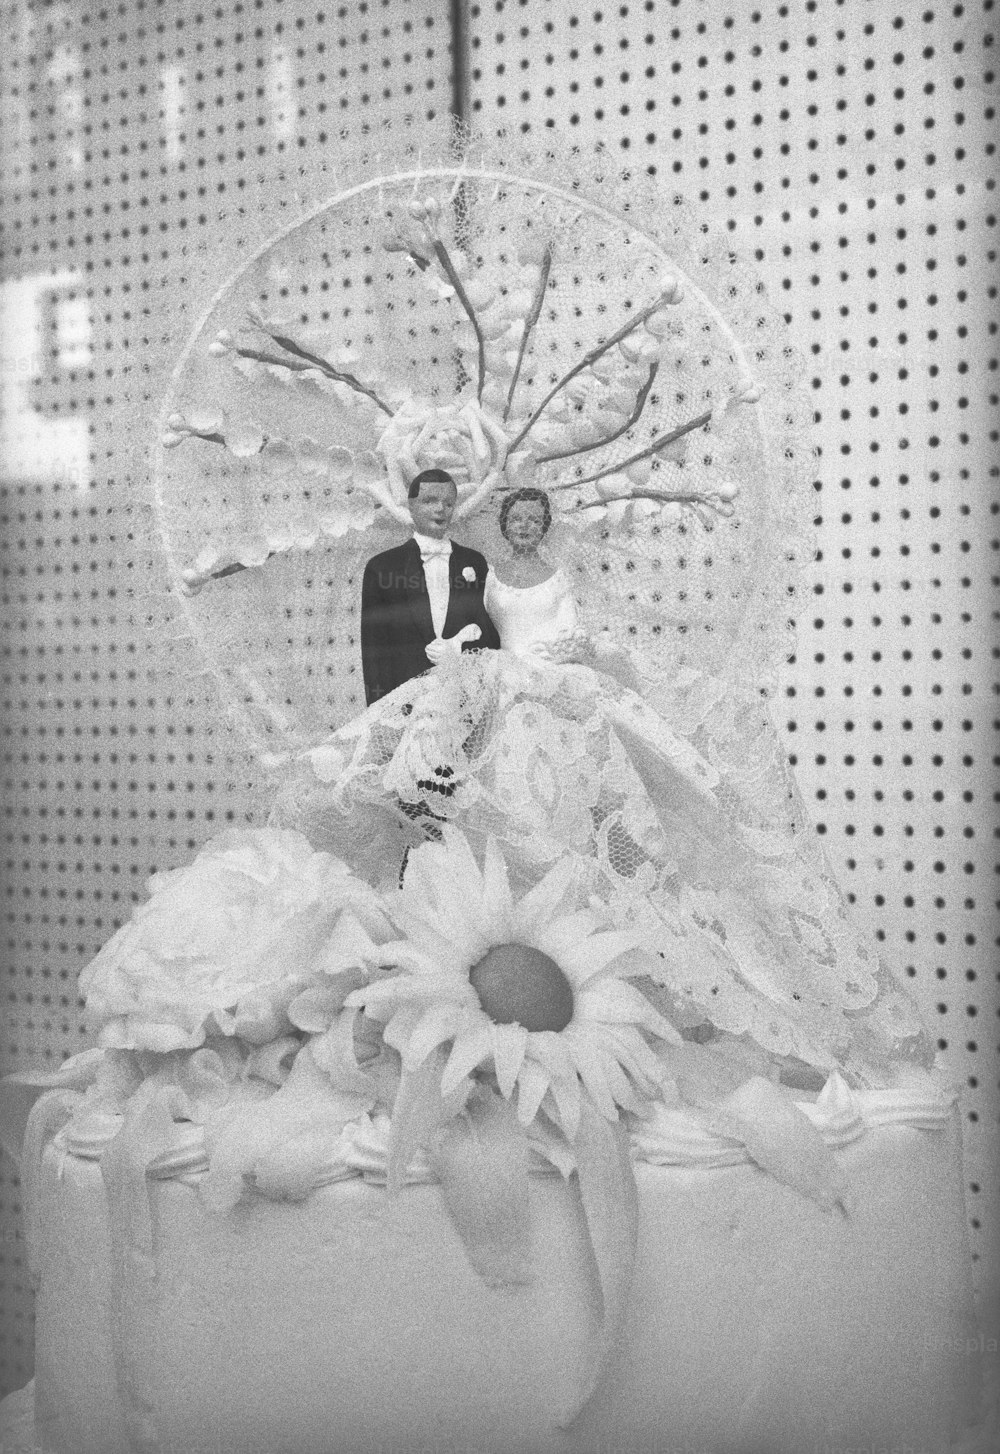 a wedding cake with a bride and groom on top